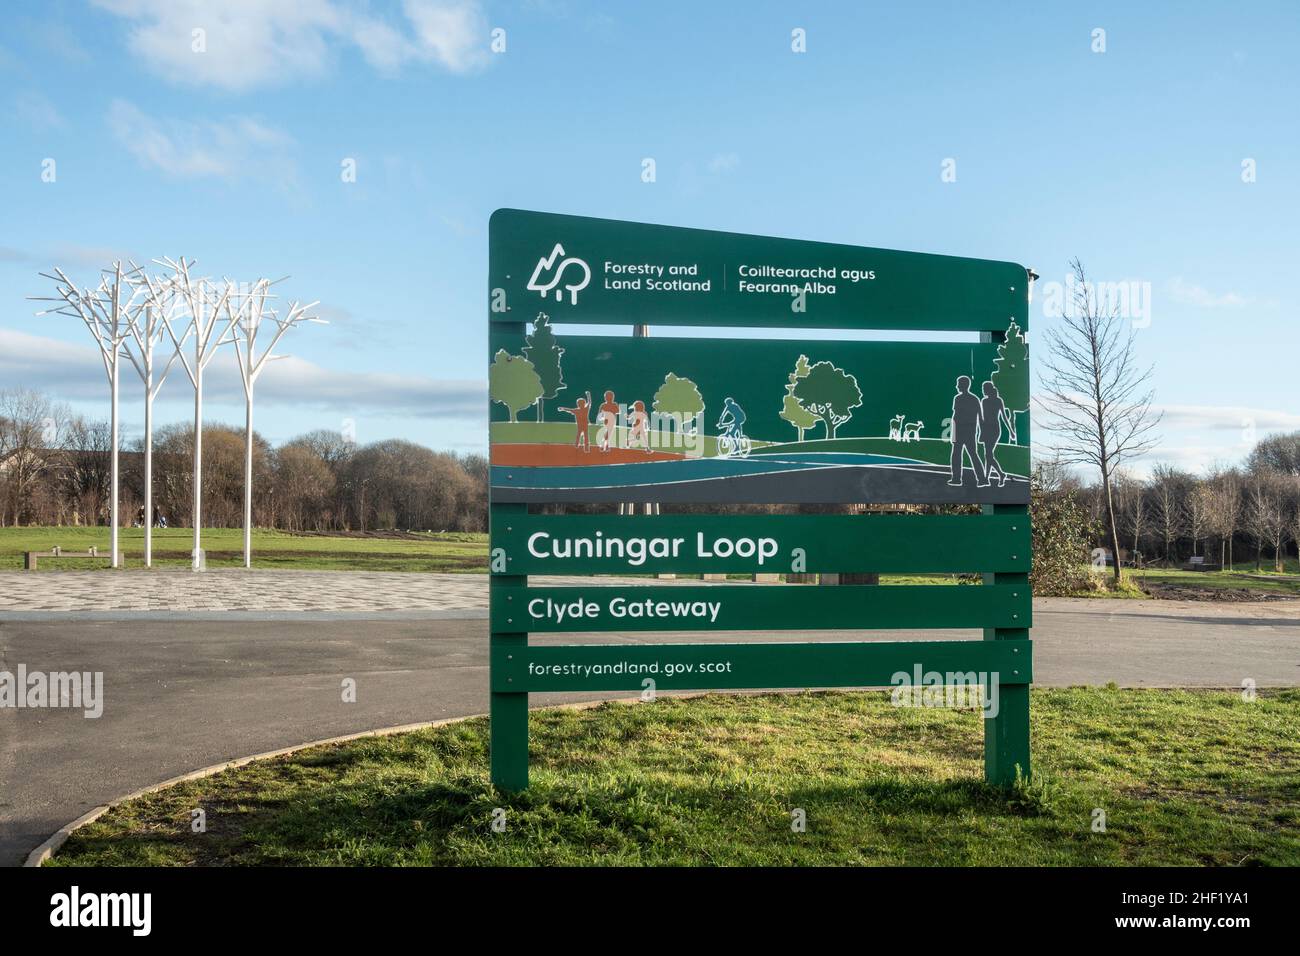 Entrance sign at one of the entrances to Cuningar Loop, a A Forestry and Land Scotland multi-activity woodland park. Stock Photo